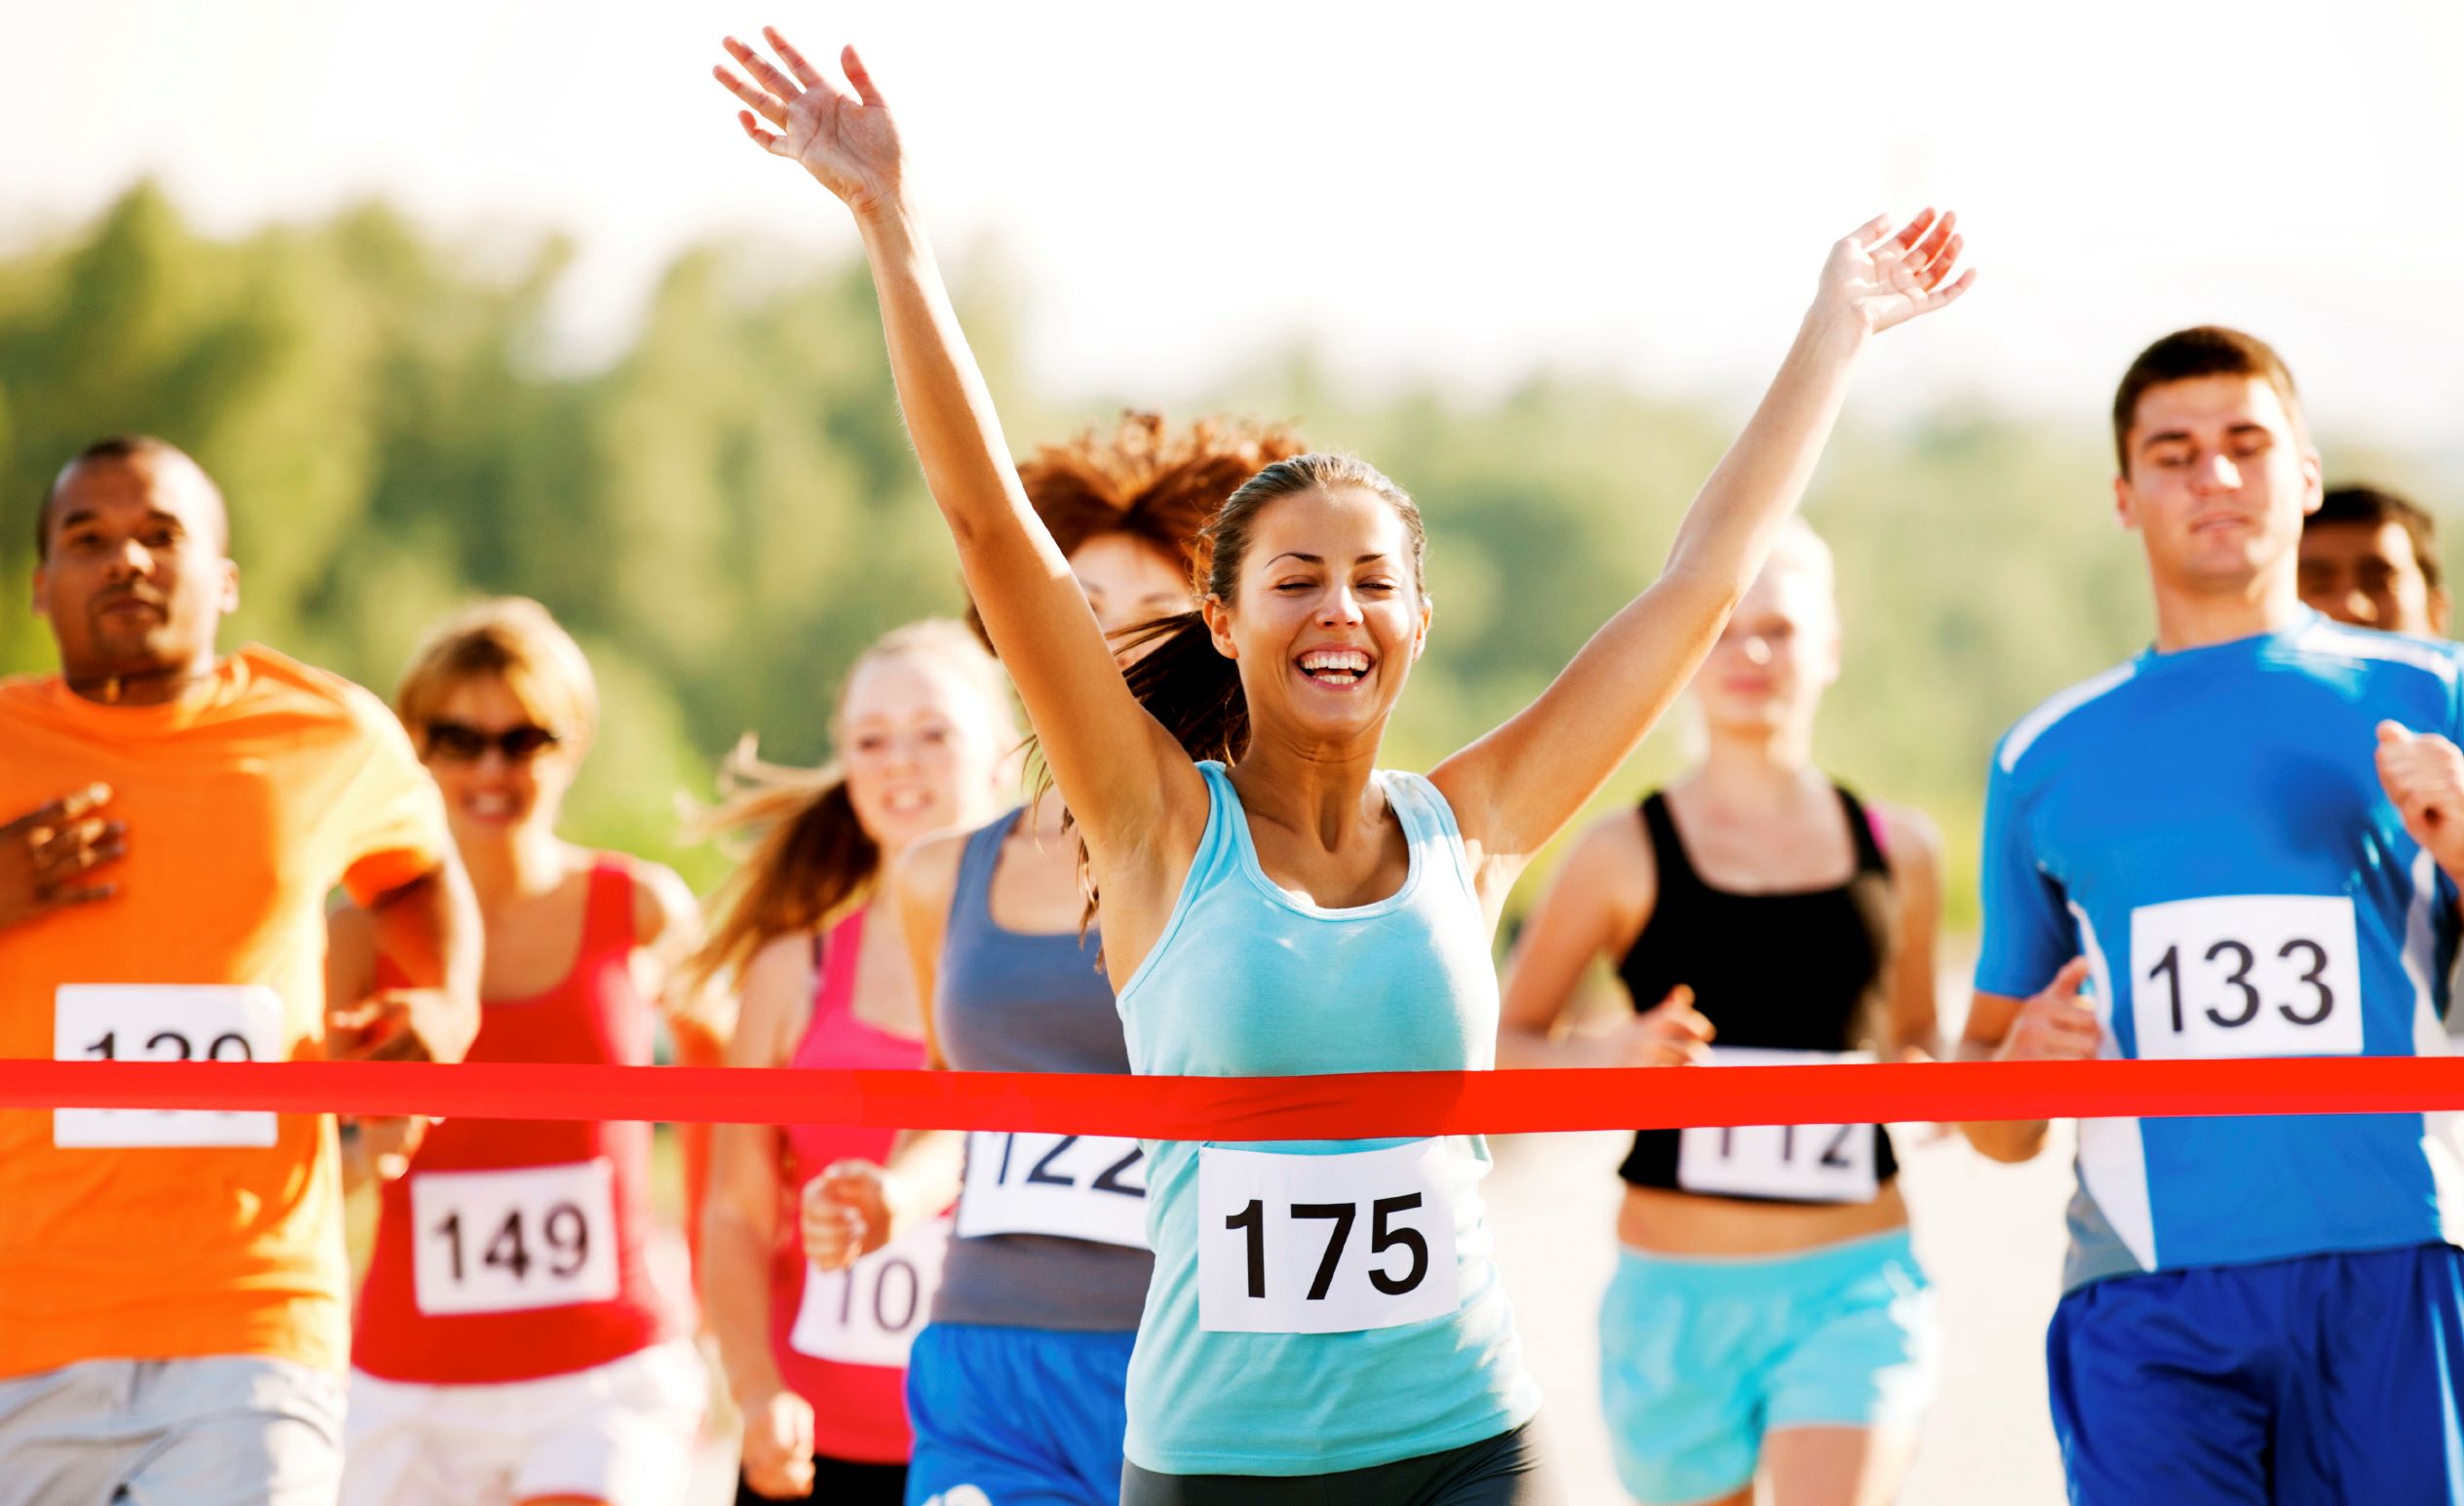 5K Run: Boost Your Endurance And Fitness